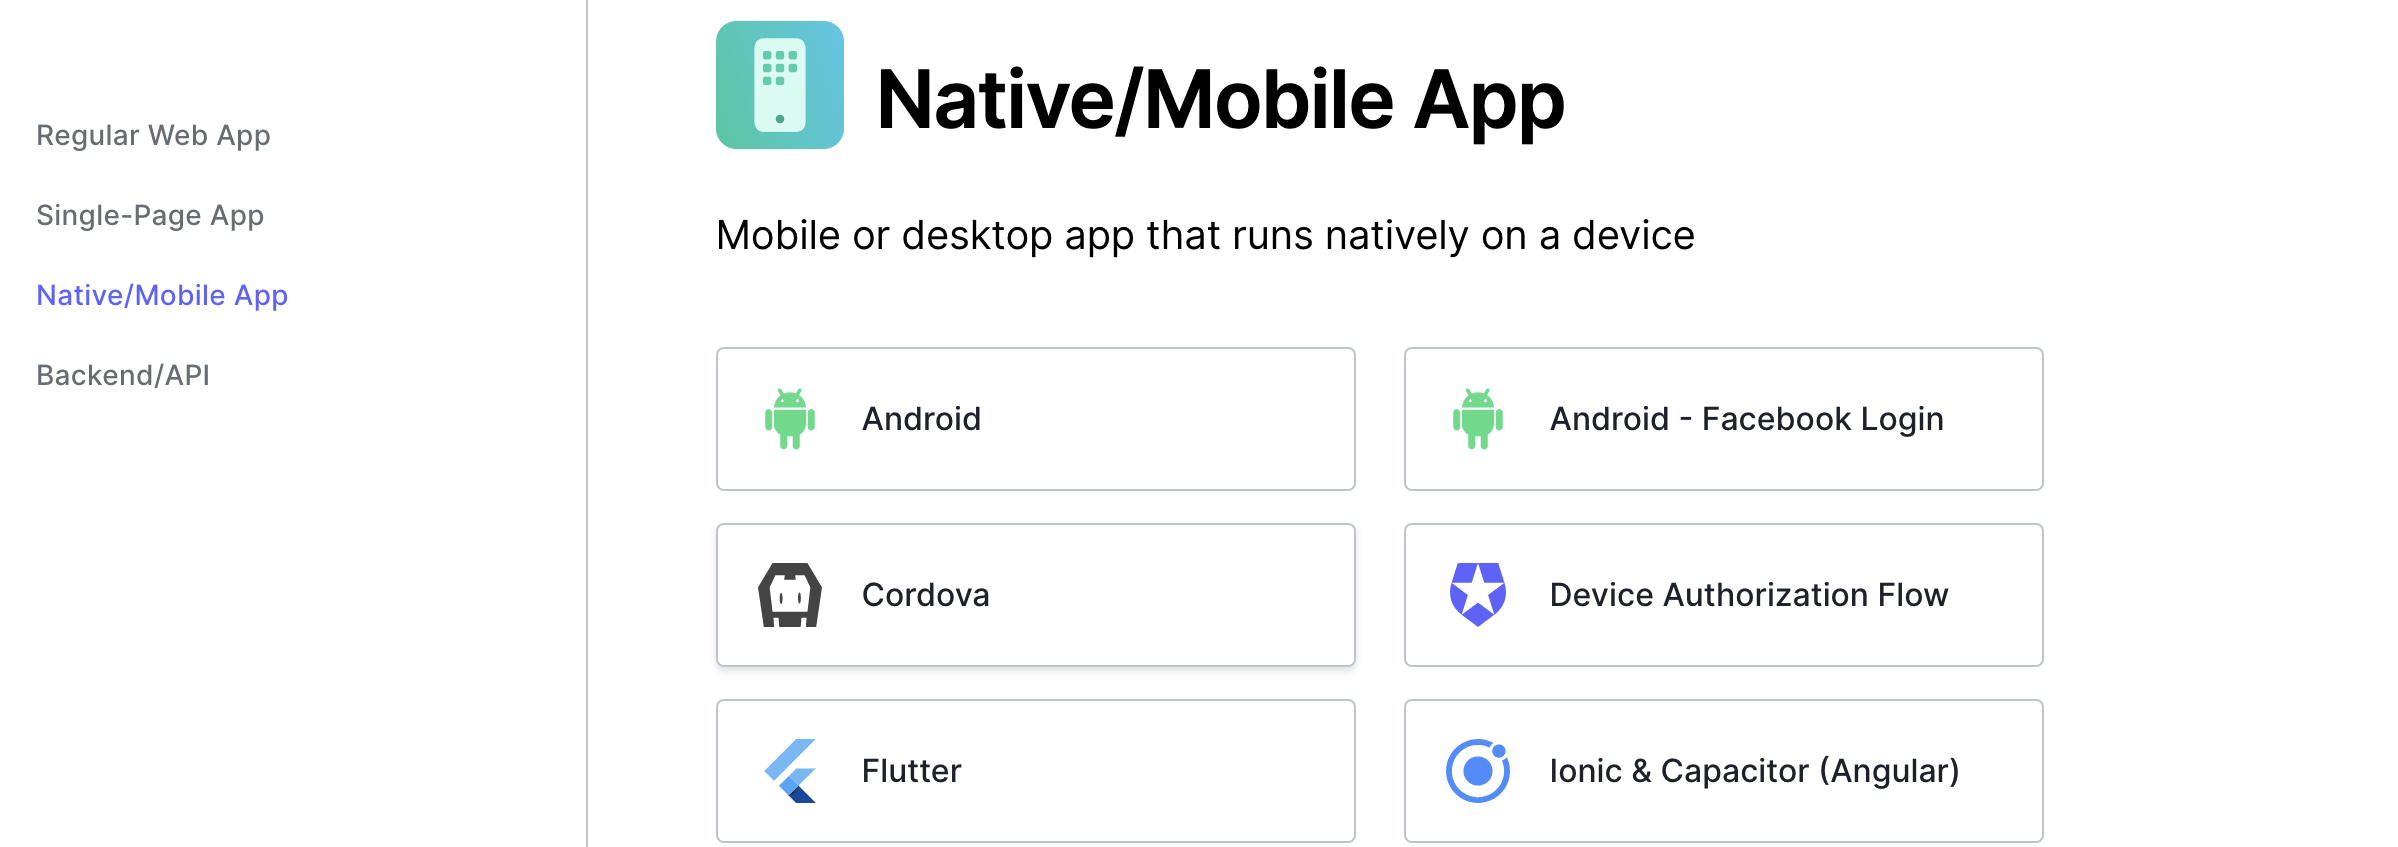 screenshot of page displaying a grid of regular web app options including Android, Cordova, Flutter, Device Auth Flow, and Angular